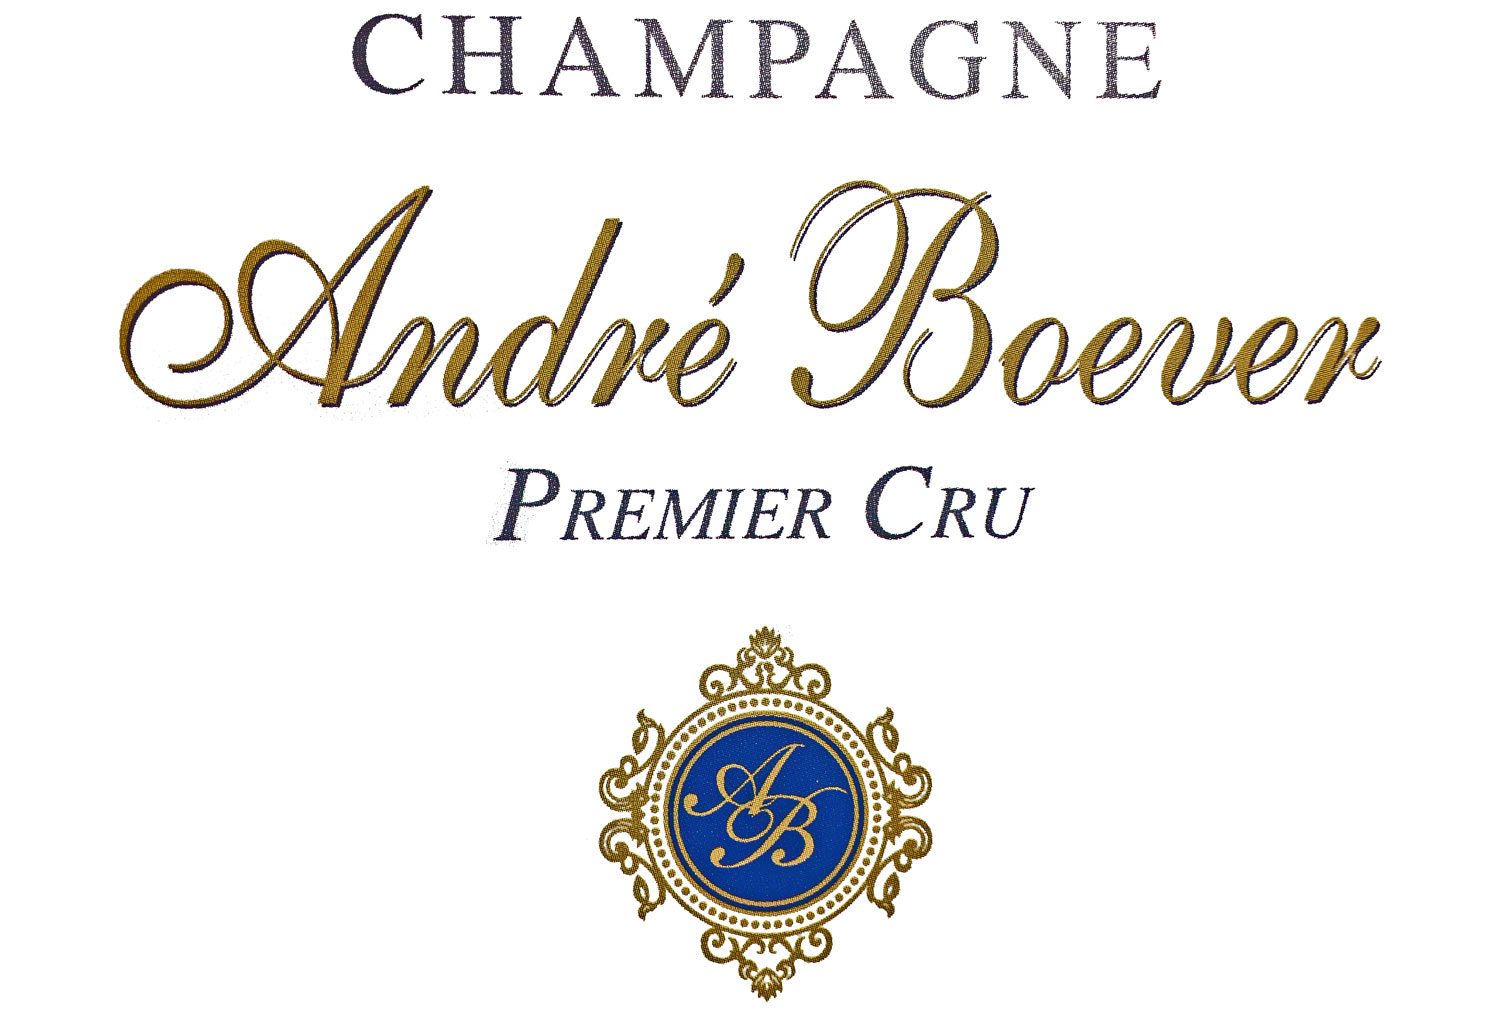 Champagne André Boever